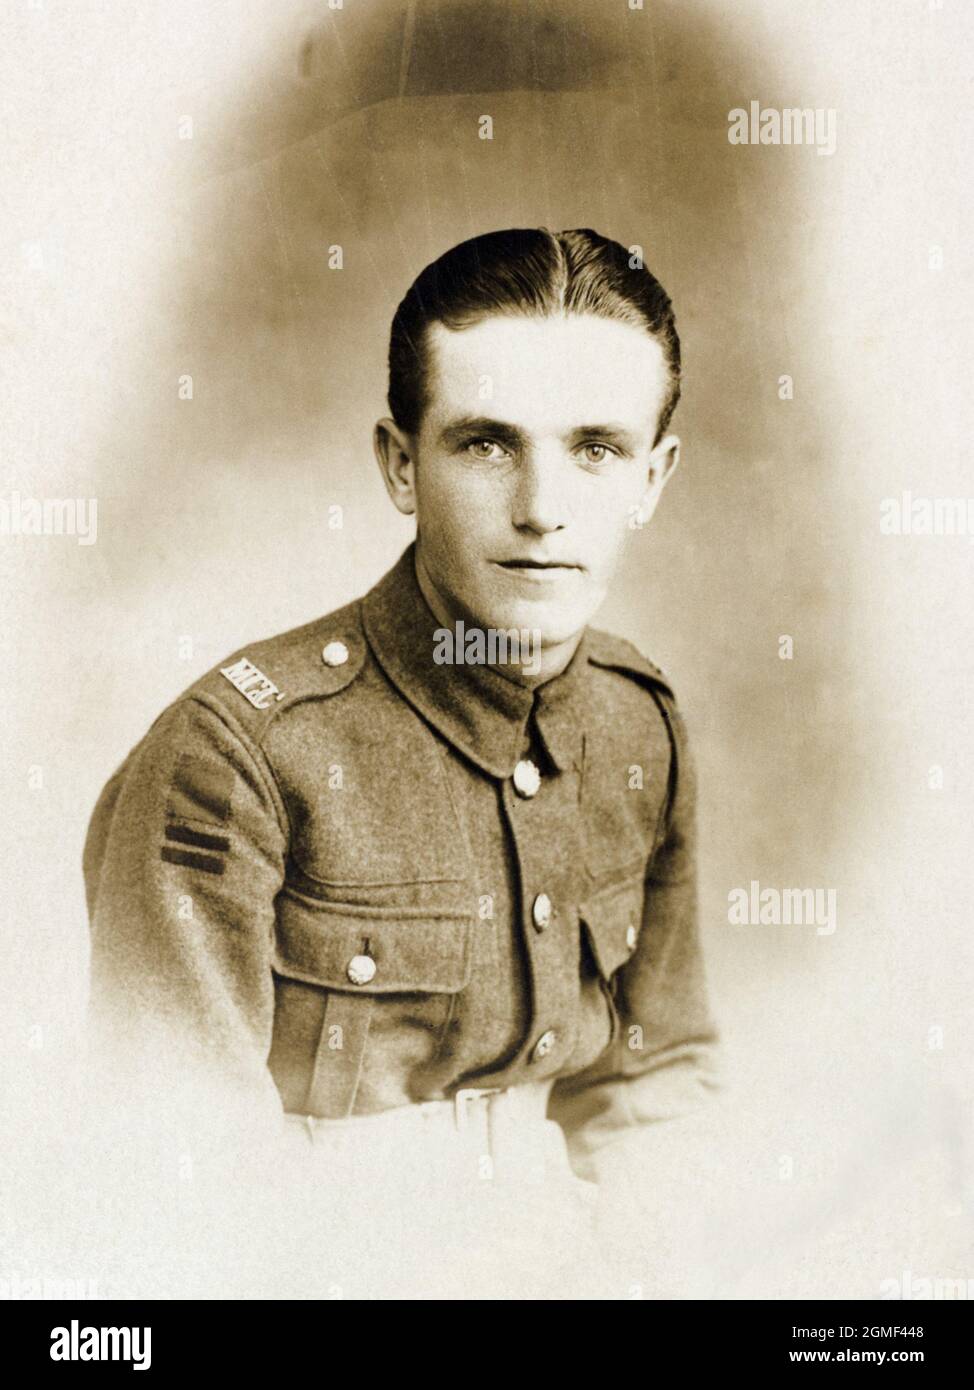 A portrait of a First World War British soldier, Private Jim Preece, Machine Gun Corps (MGC), service number 10473. He served in the 123rd Machine Gun Company, 123rd Brigade, 41st Devision. Marked as taken in France on 25th August. Possibly from 1916, when he was aged 22. He survived the war. Stock Photo